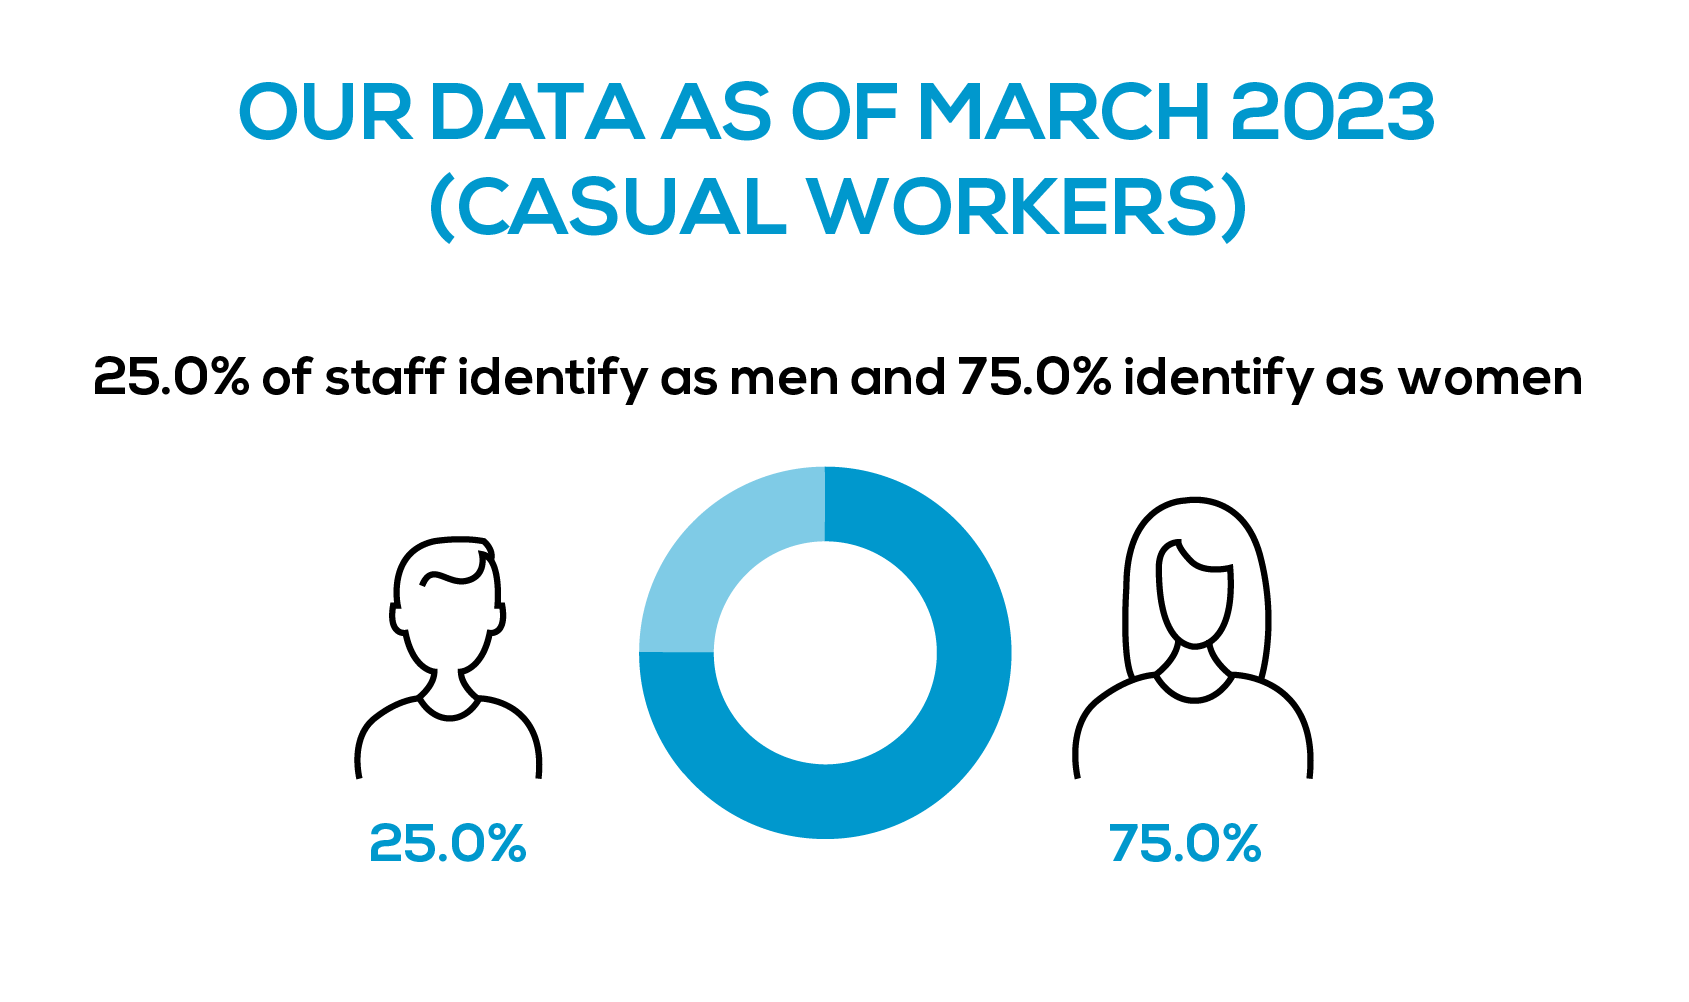 Casual workers: 25% of staff identify as men and 75% of staff identify as women